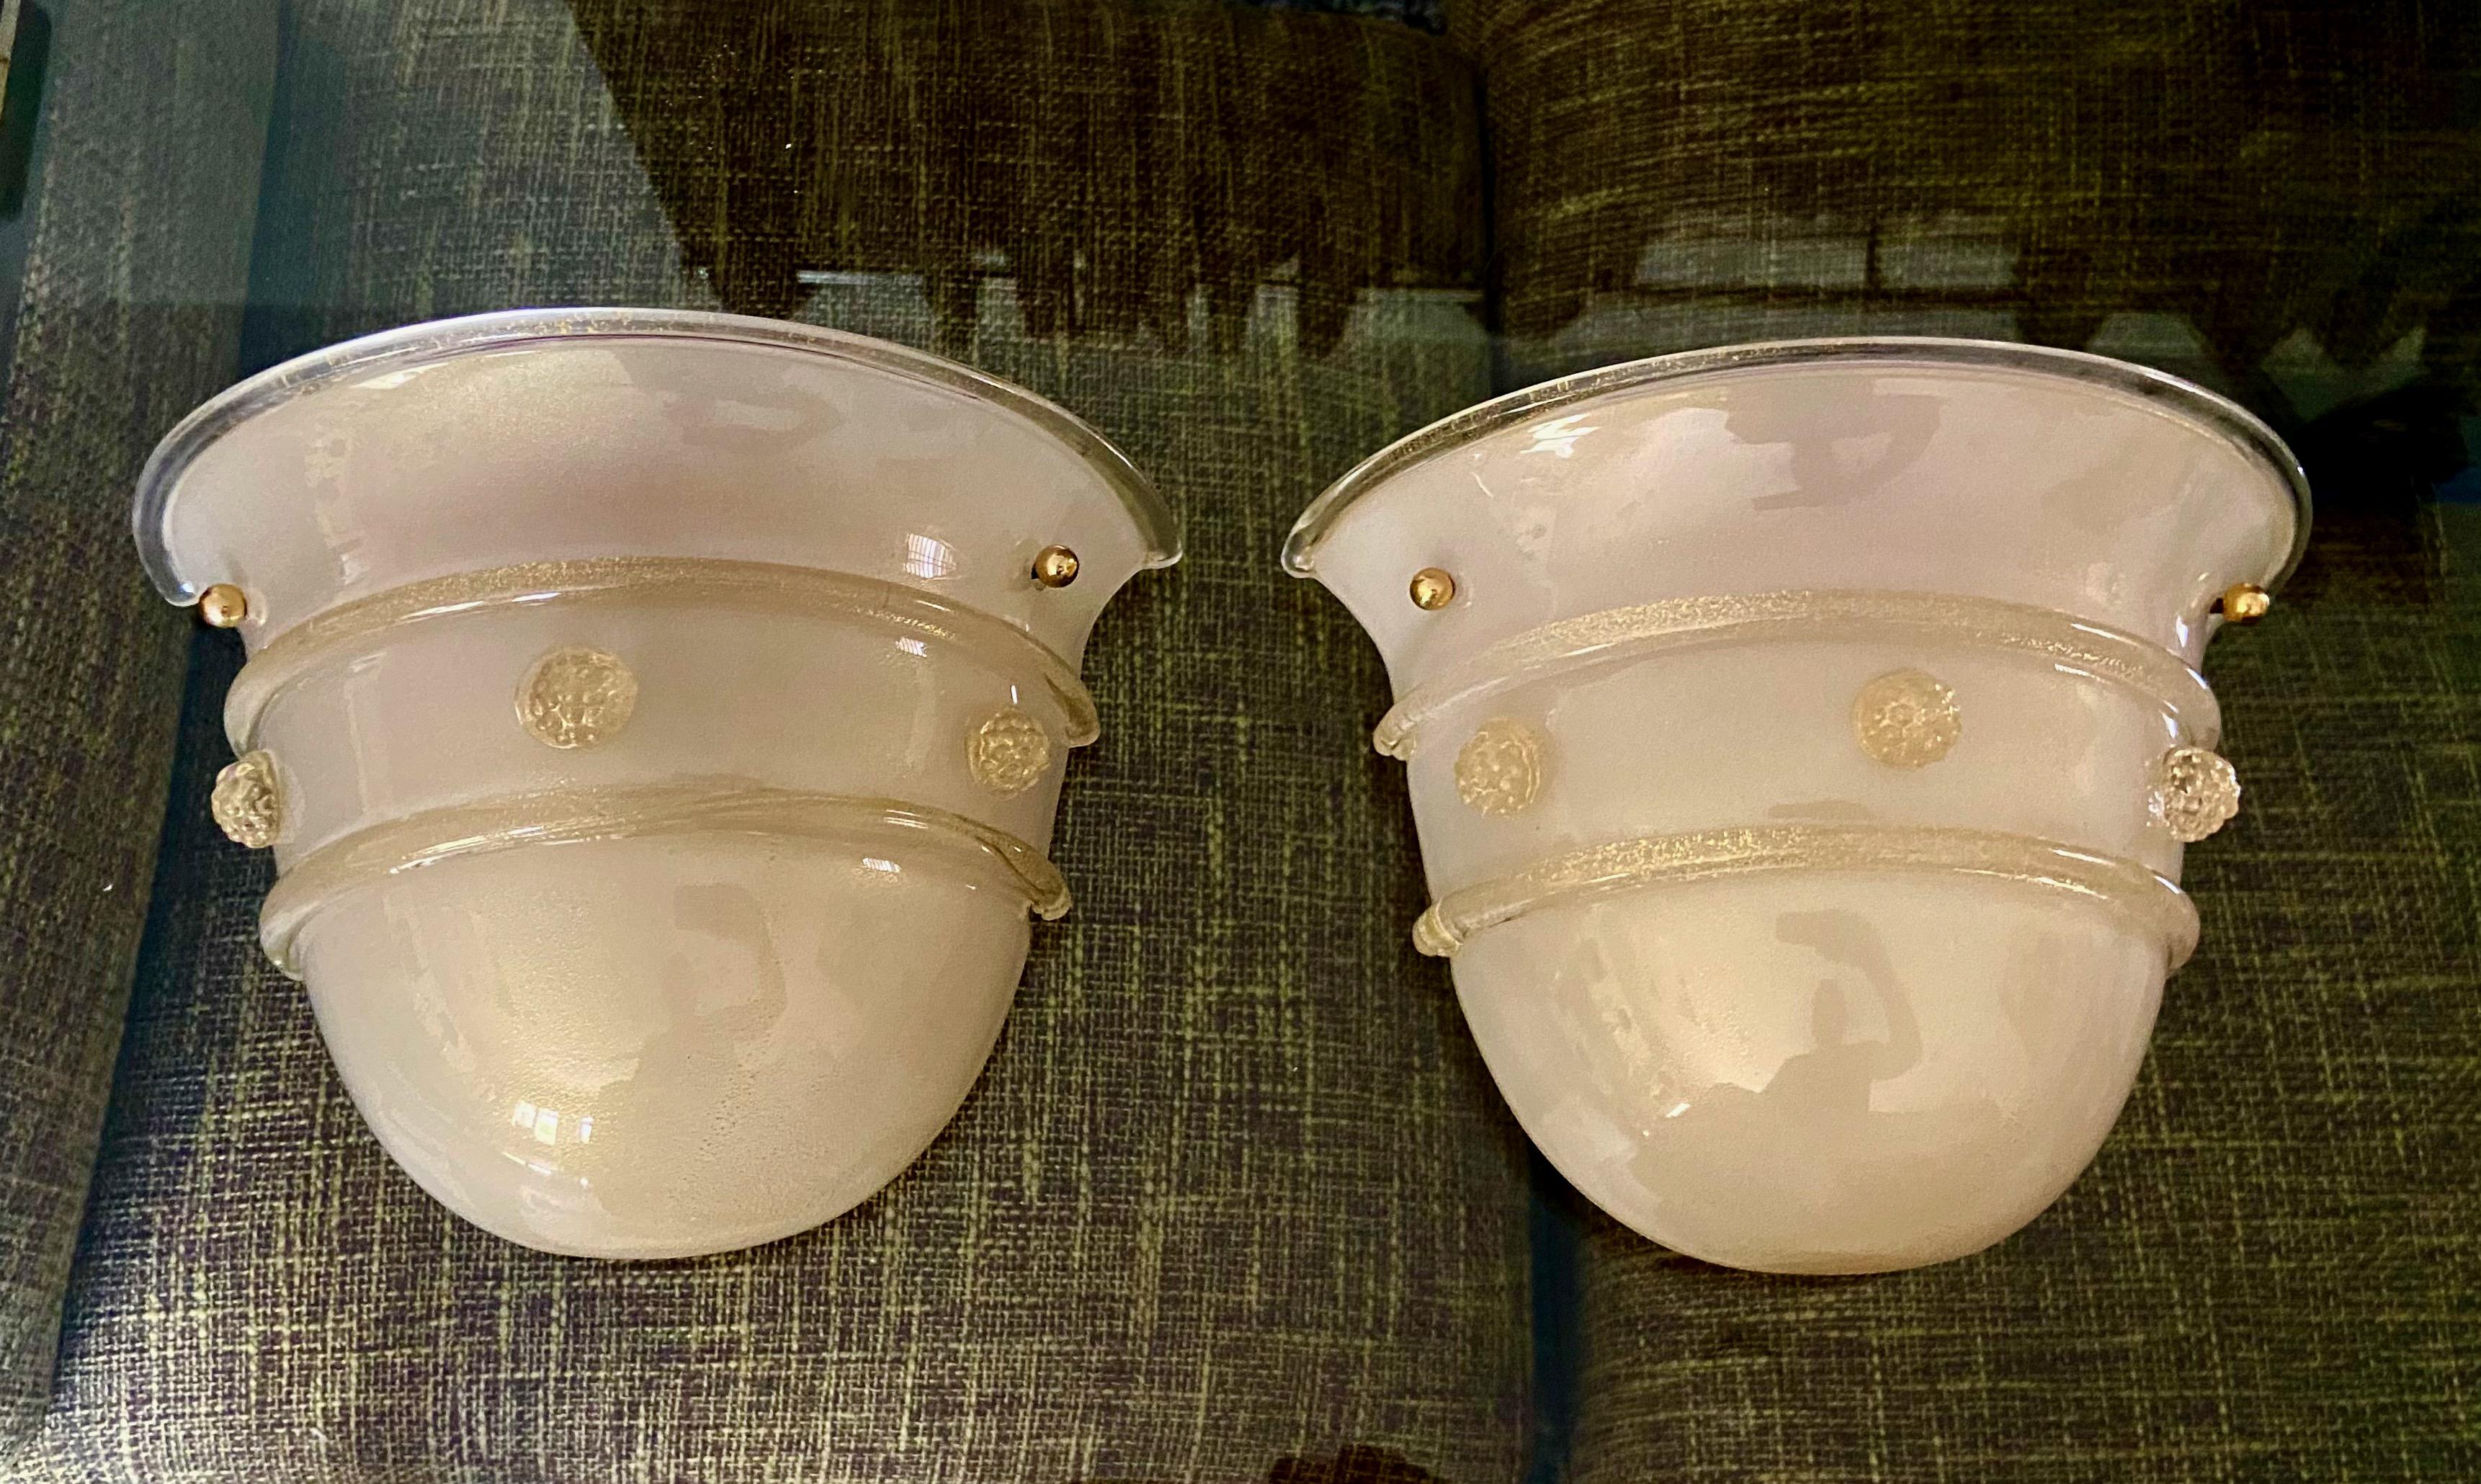 Pair of wall sconces by Barovier & Toso. Opaque glass covered by clear glass with fine scattering of gold flecks. Glass details and florets are in clear and gold. Newly wired. Each fixture uses one candelabra base bulb.